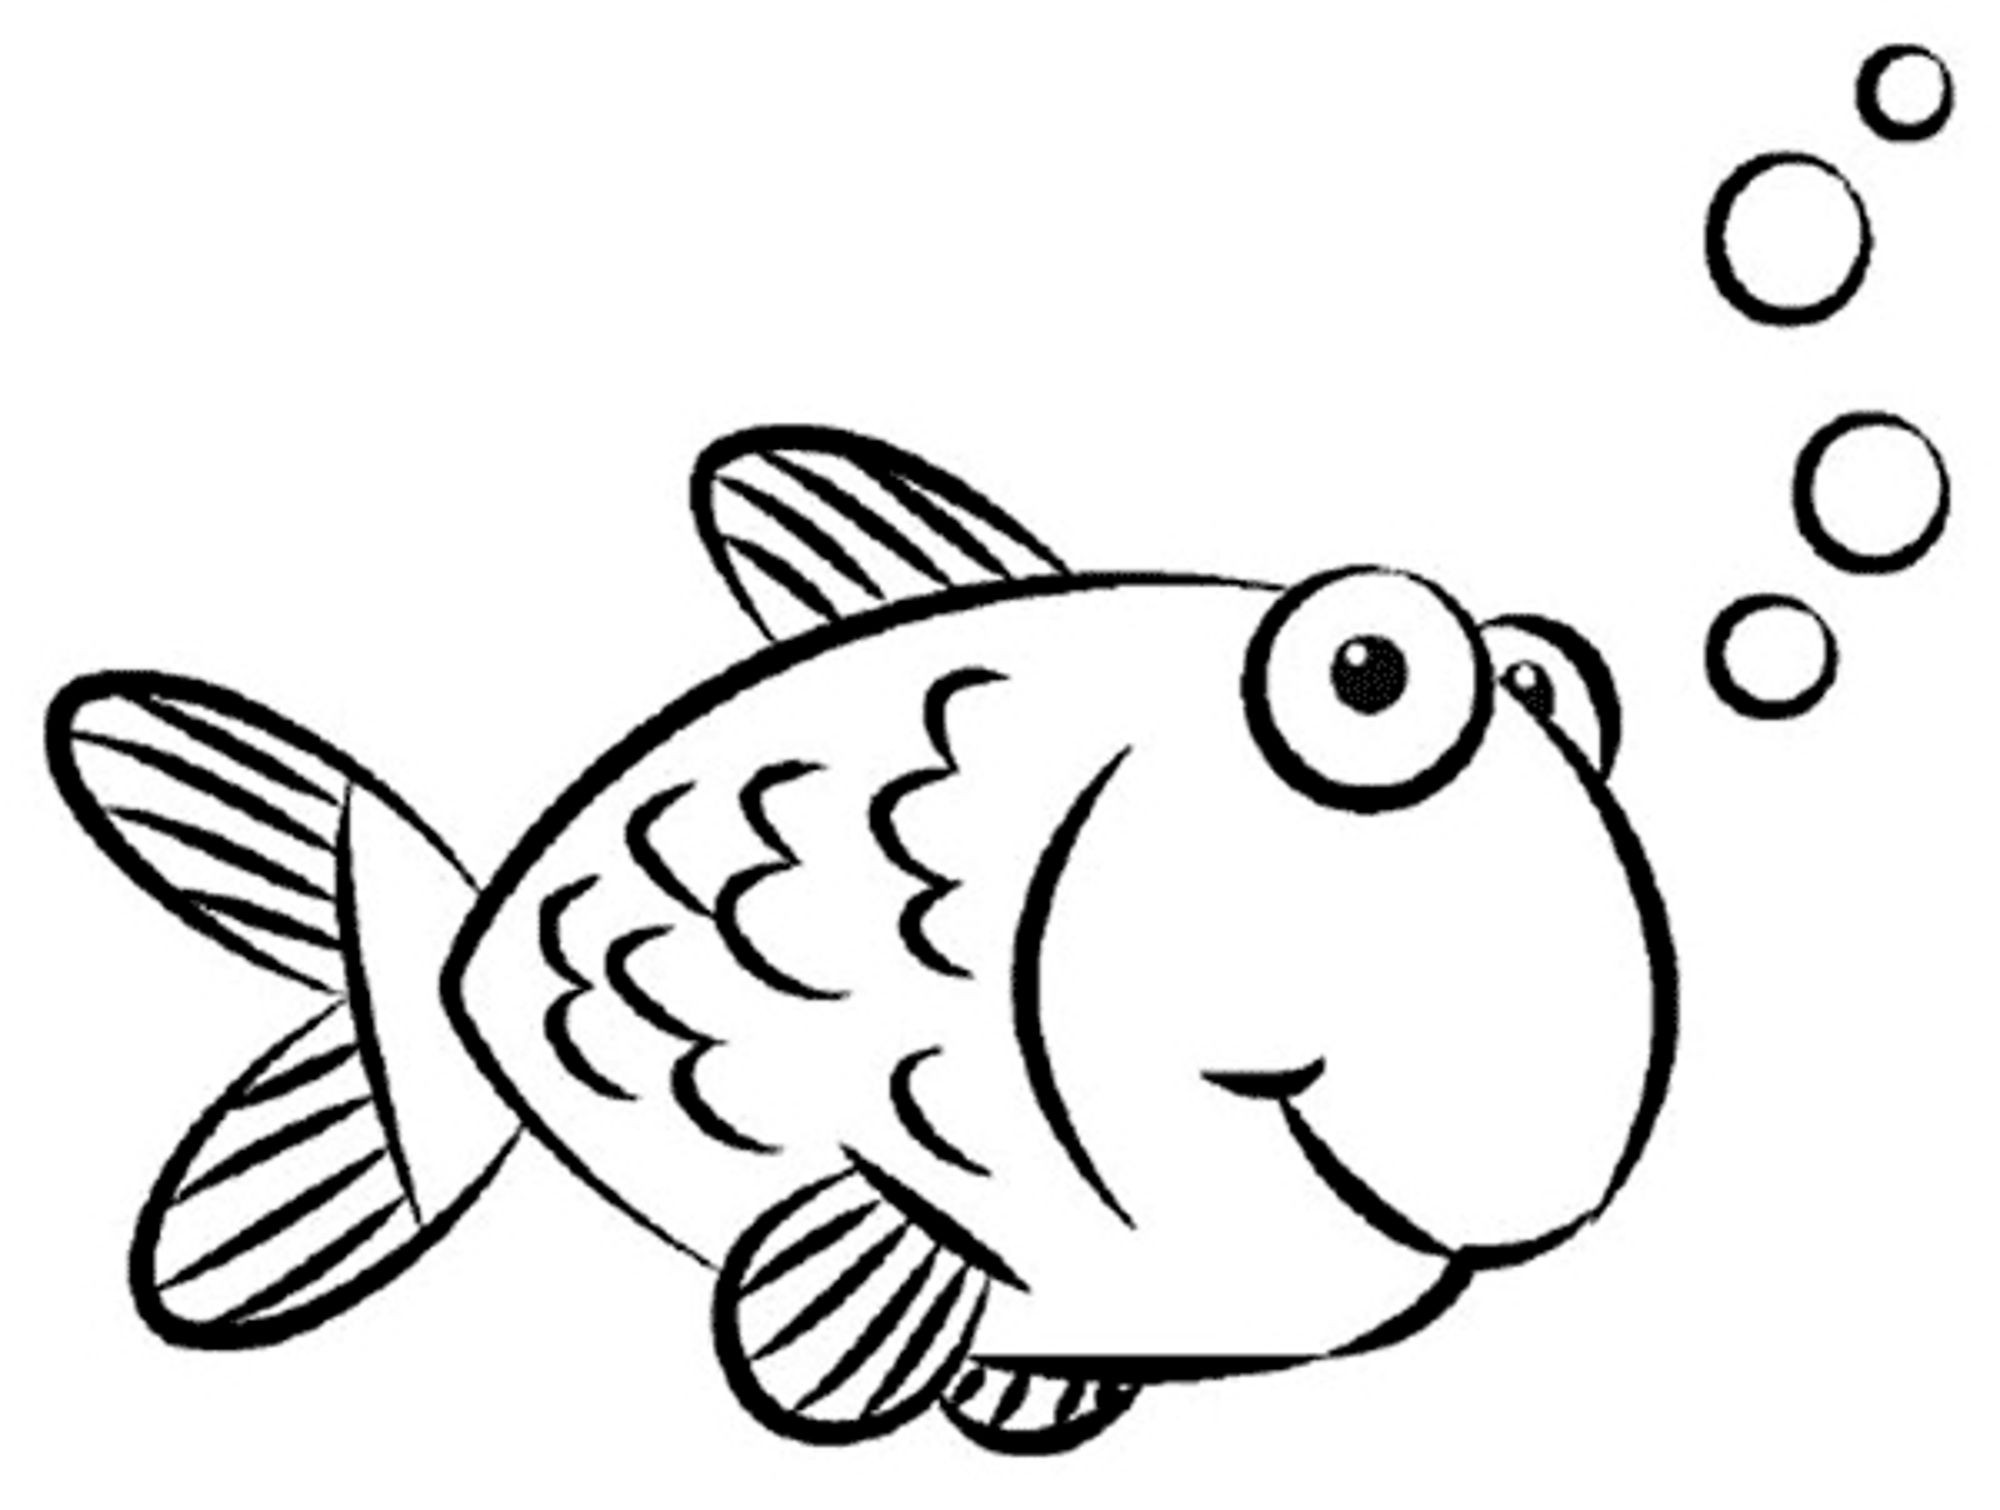 Coloring Pages Fish For Kids
 fish coloring pages for kids printable